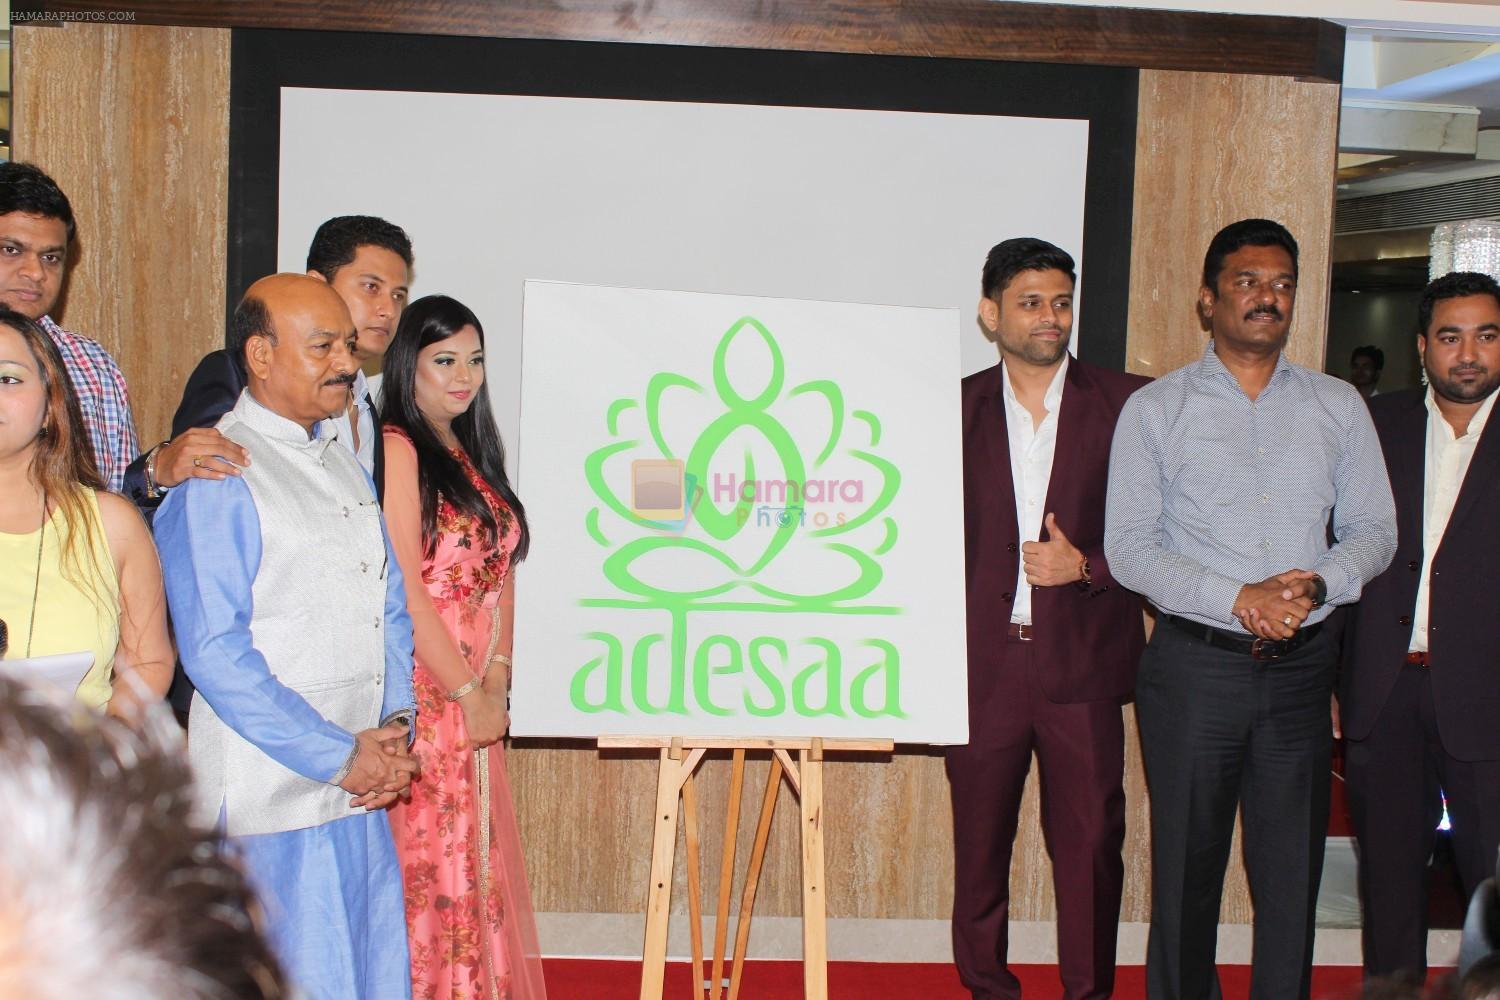 at The Grand Launch Of Adesaa Wellness Concerning Yoga on 19th May 2017